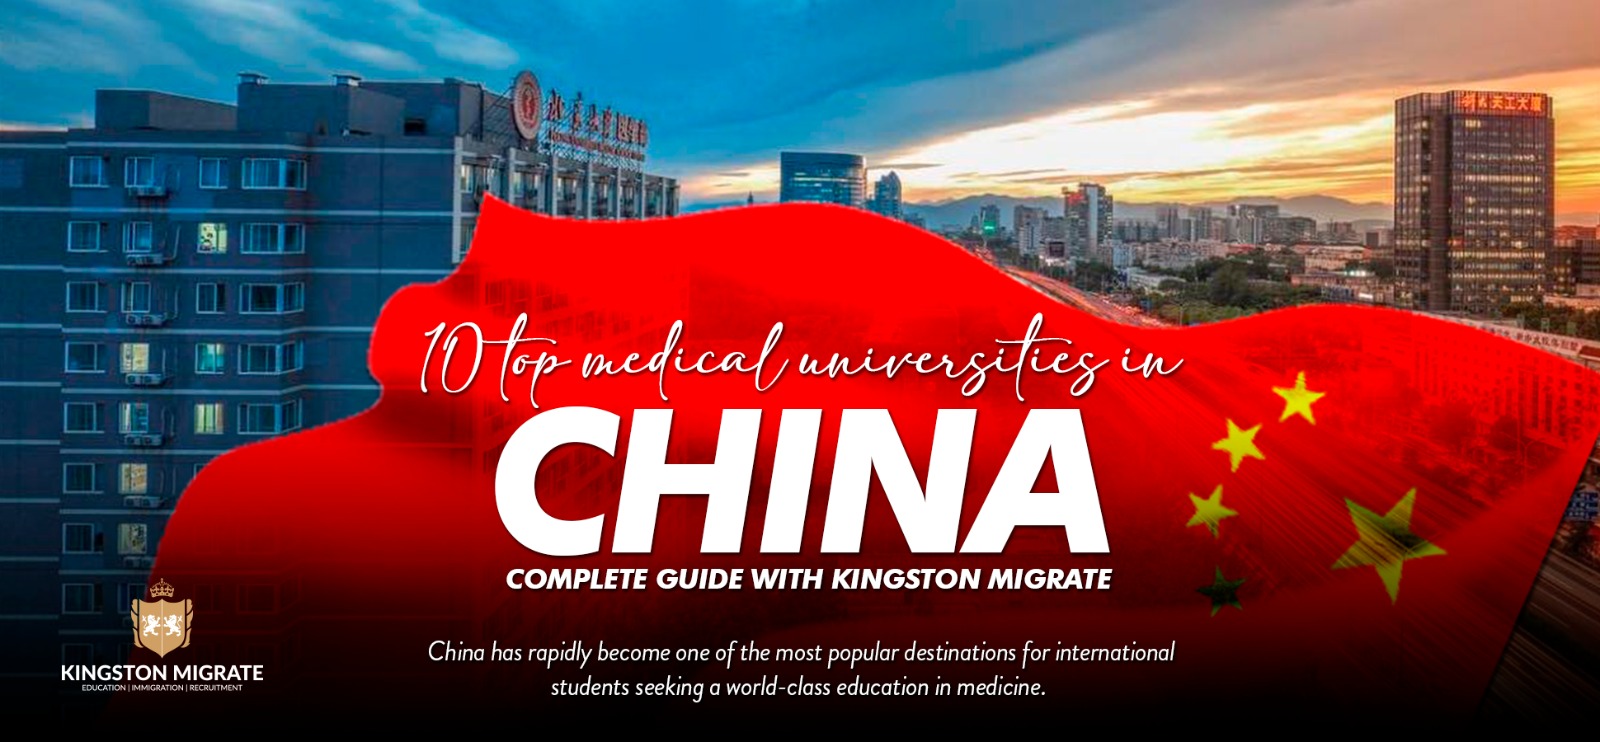 10 Top Medical Universities in China – Complete Guide with Kingston migrate